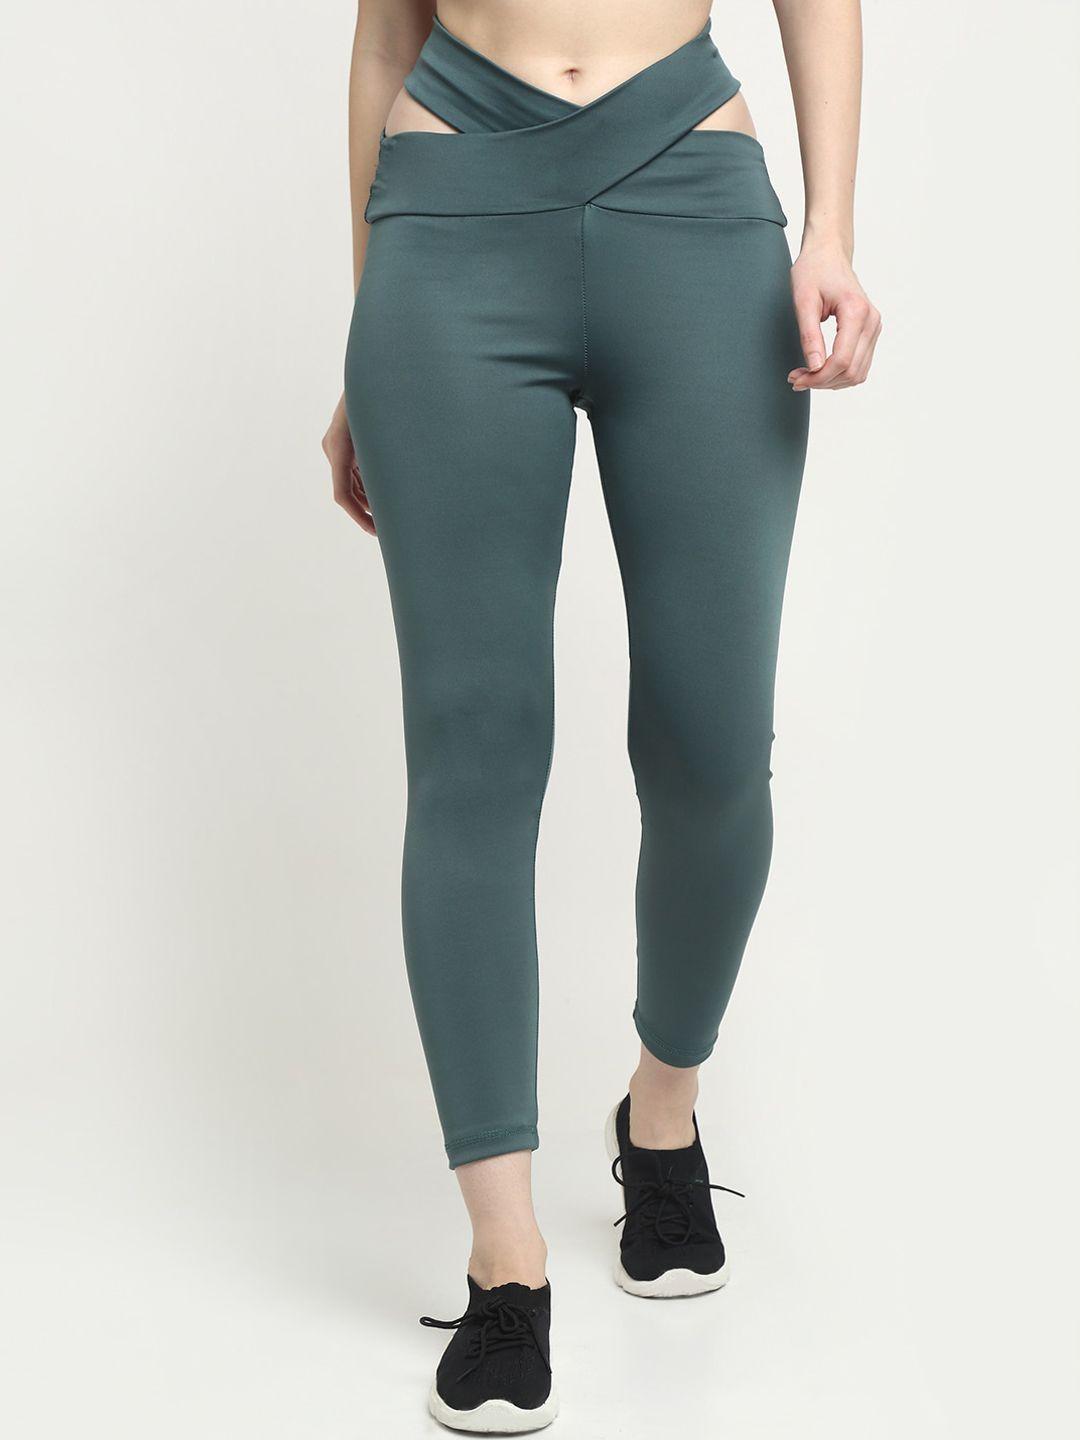 everdion women teal-green solid slim-fit tights